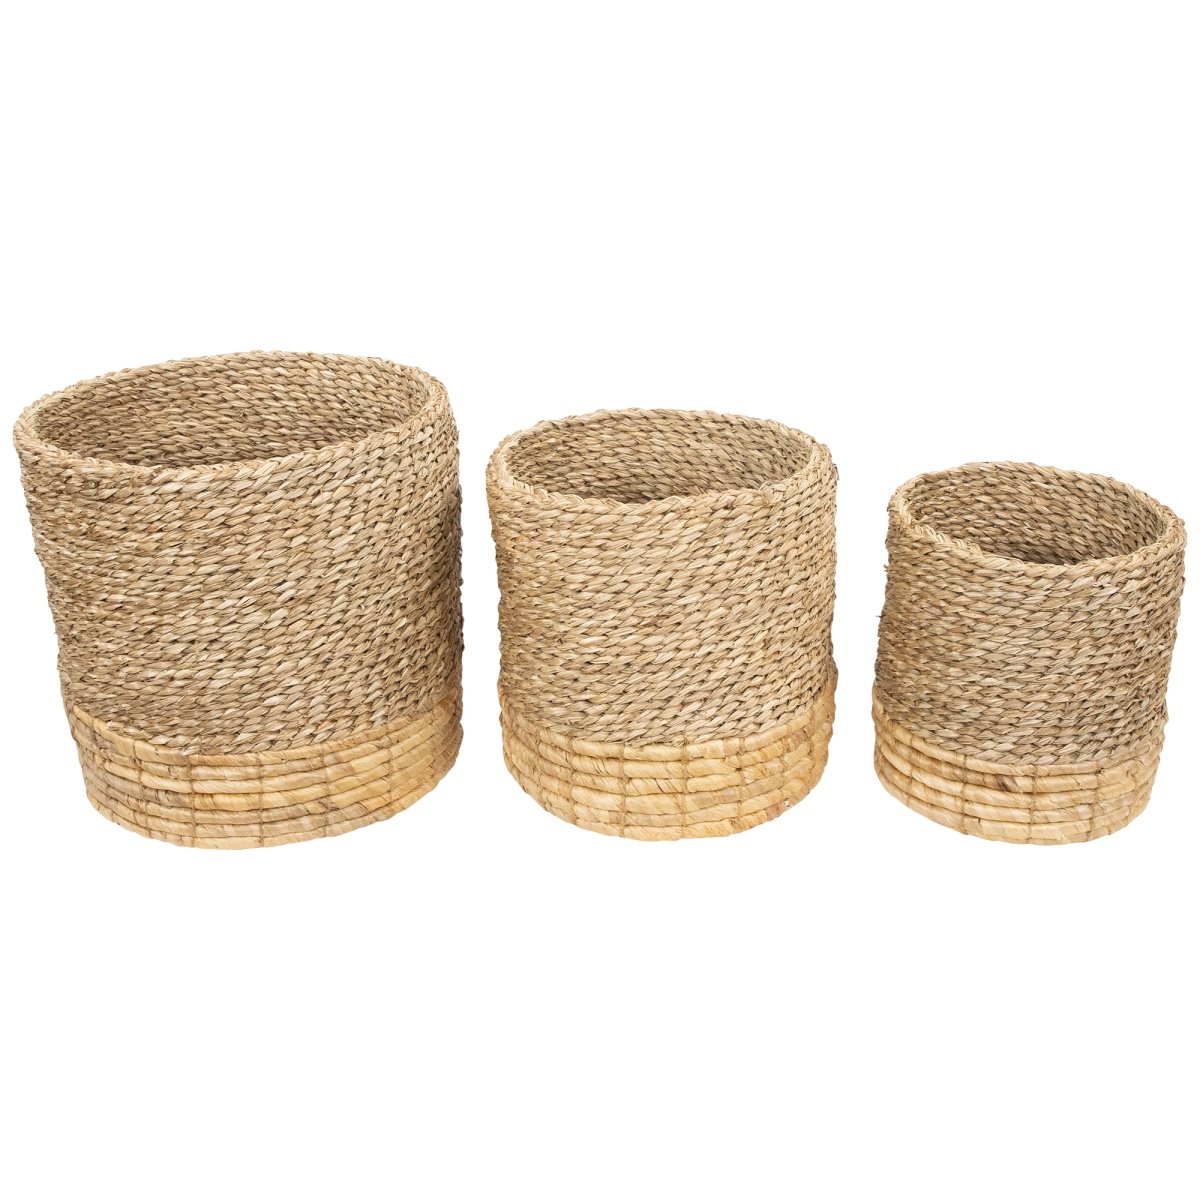 Picture of Northlight 35737388 13.75 in. Textured Woven Round Seagrass Baskets - Set of 3